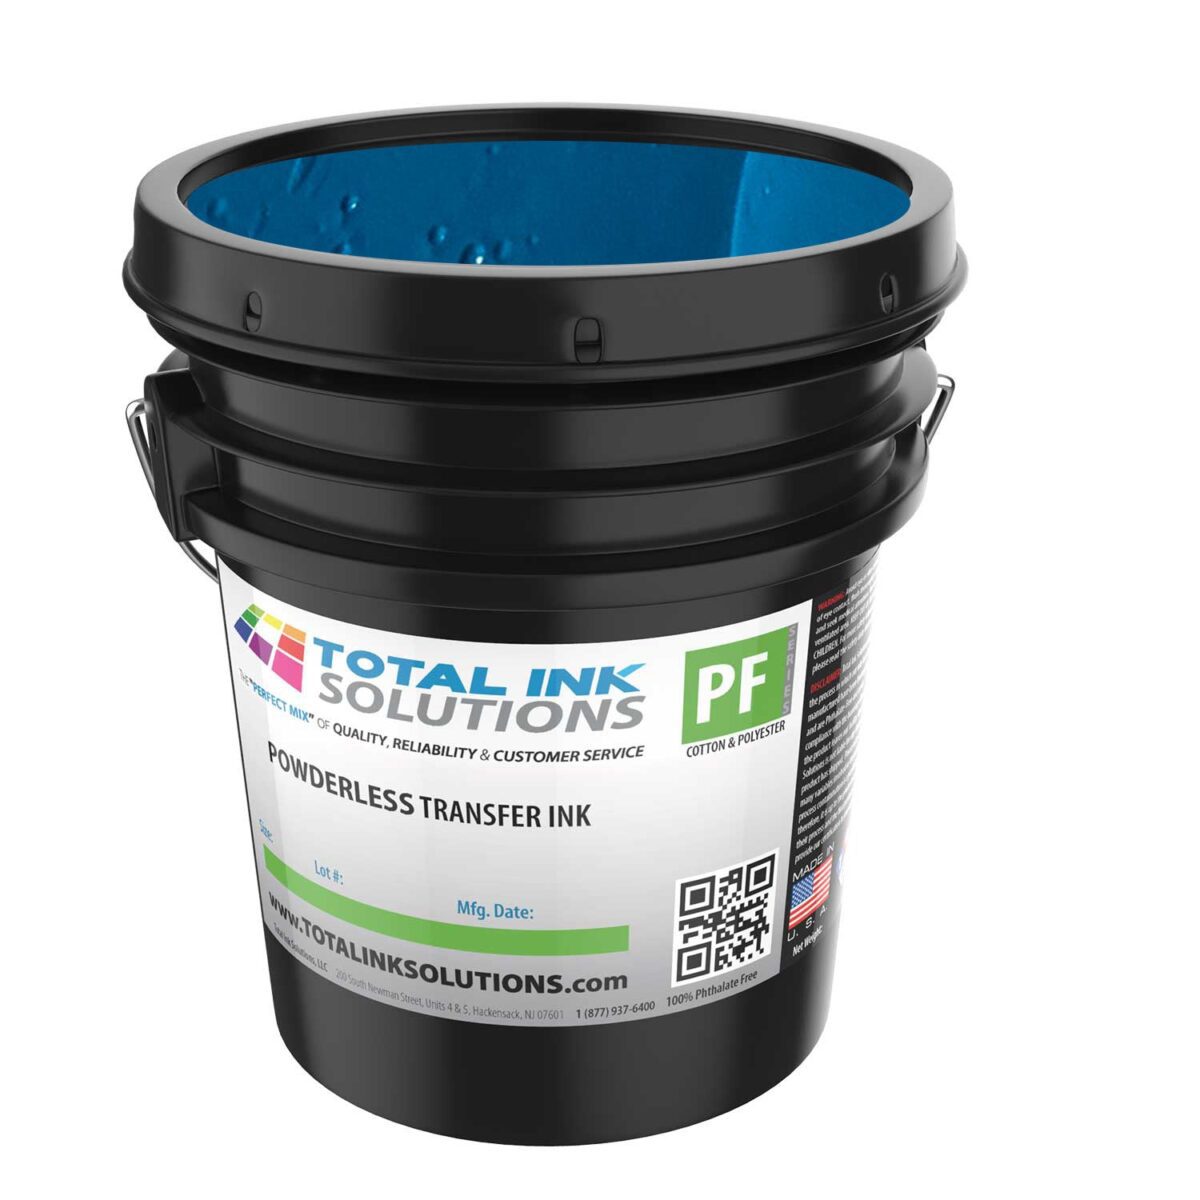 Powderless Plastisol Transfer Ink - 5 Gallons TOTAL INK SOLUTIONS®